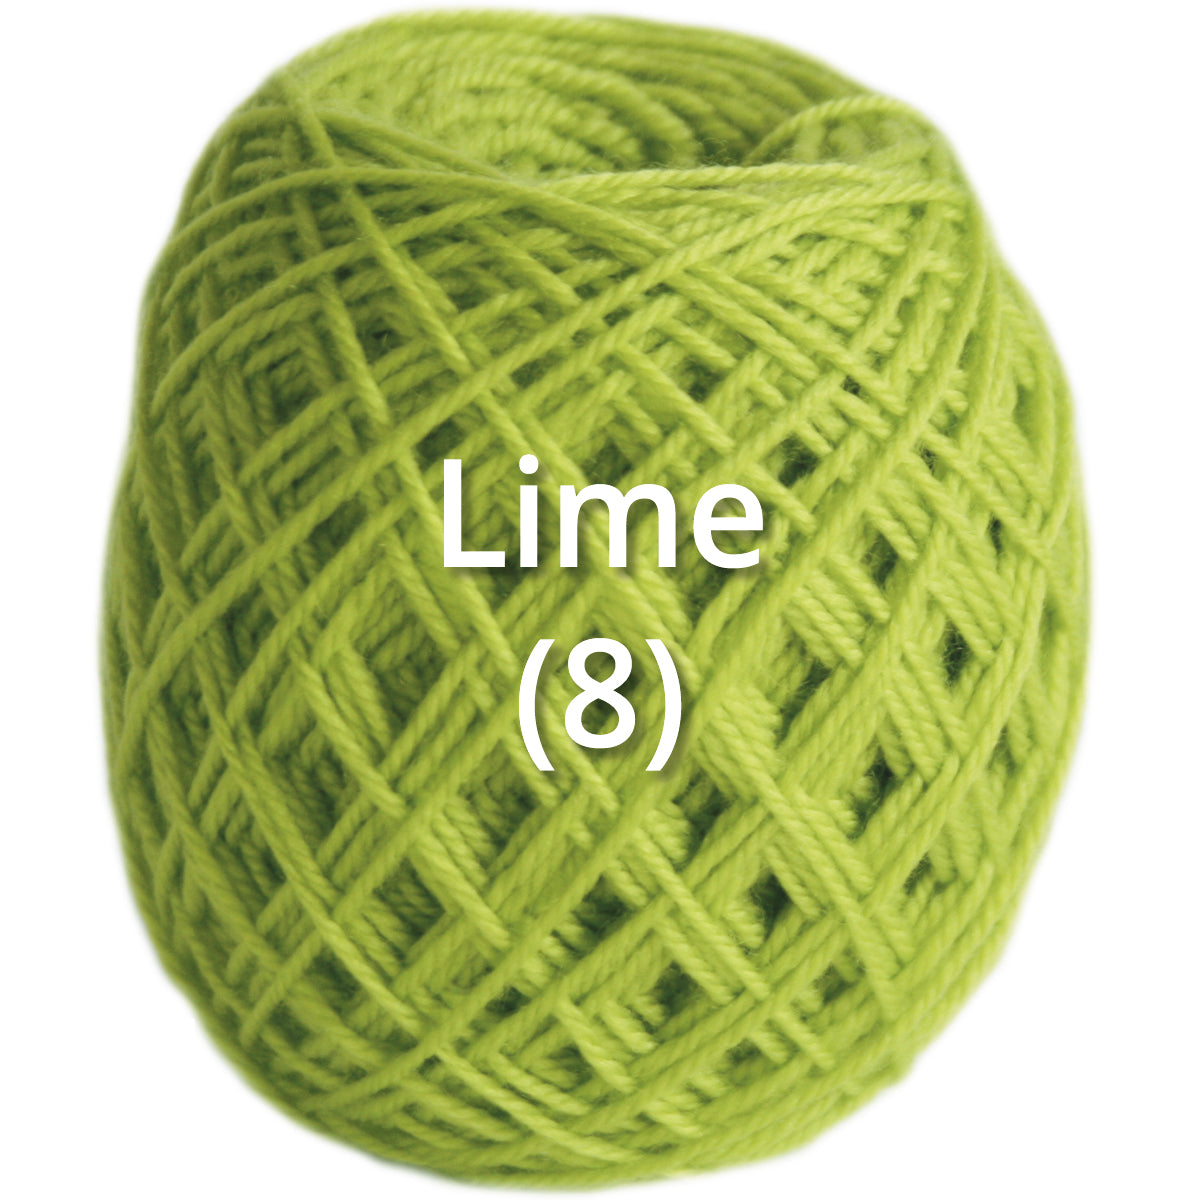 Lime - Nundle Collection 4 Ply Sock Yarn